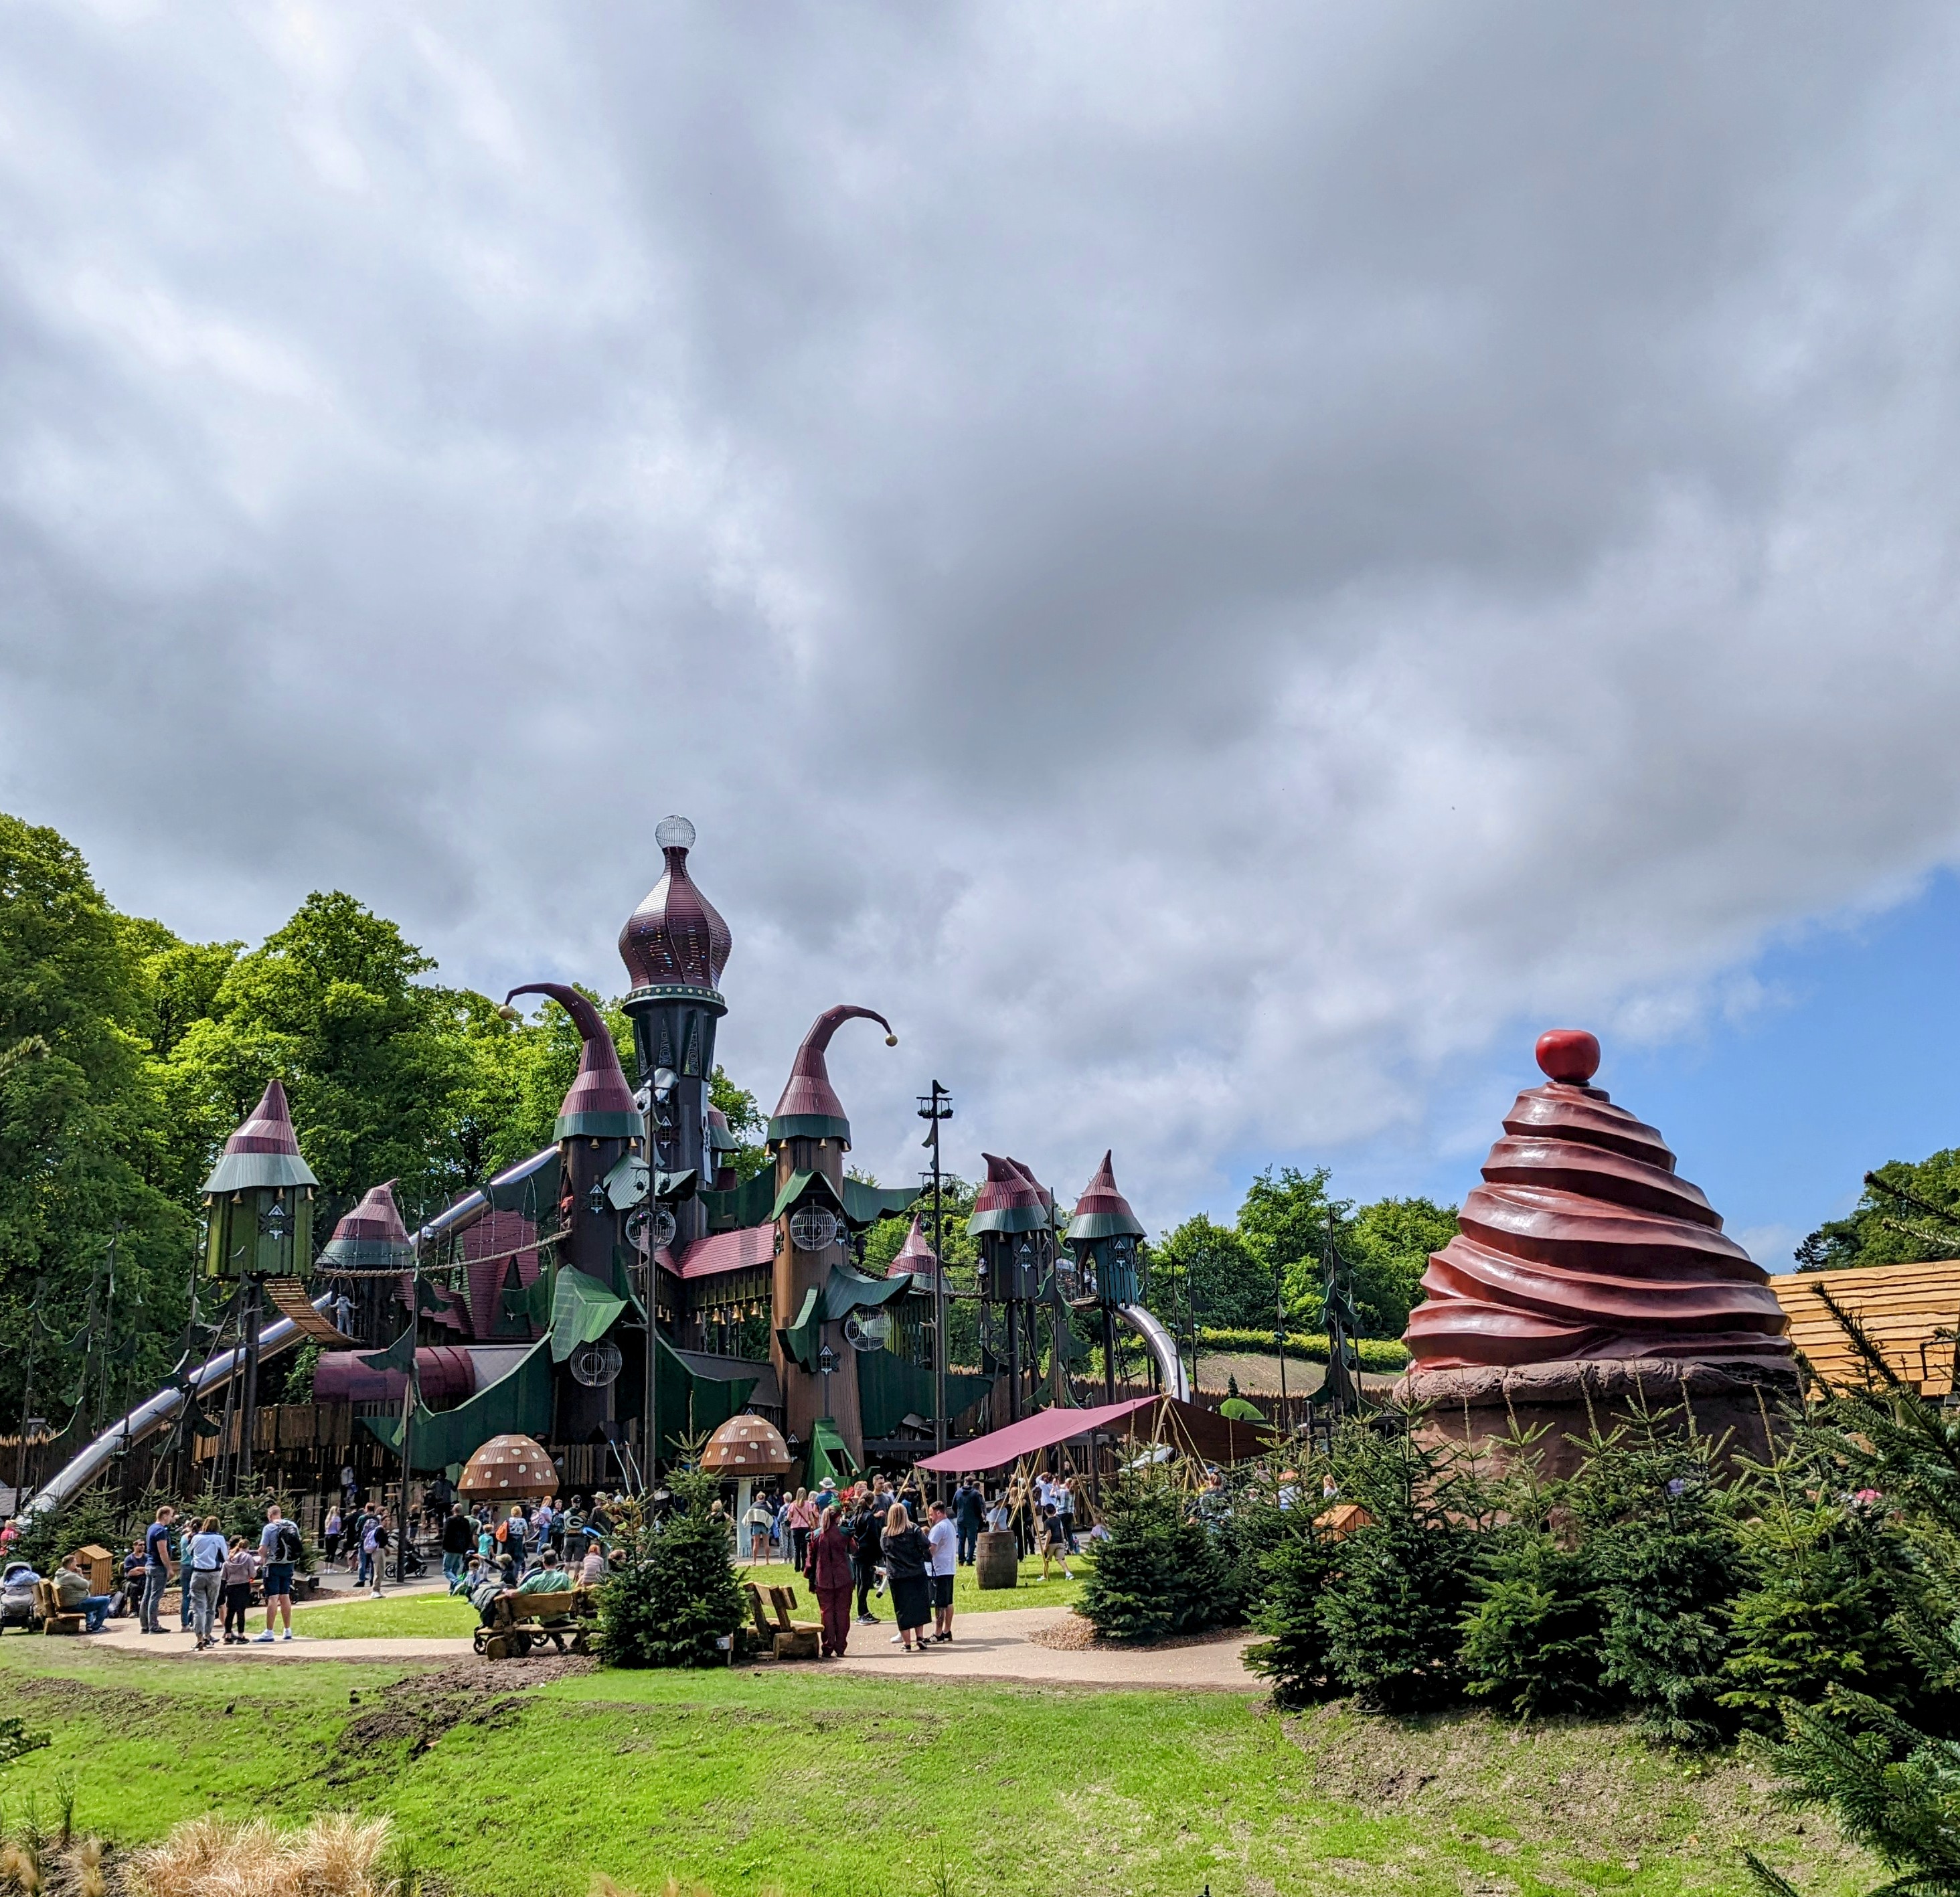 Lilidorei Playground at The Alnwick Garden : What to Expect